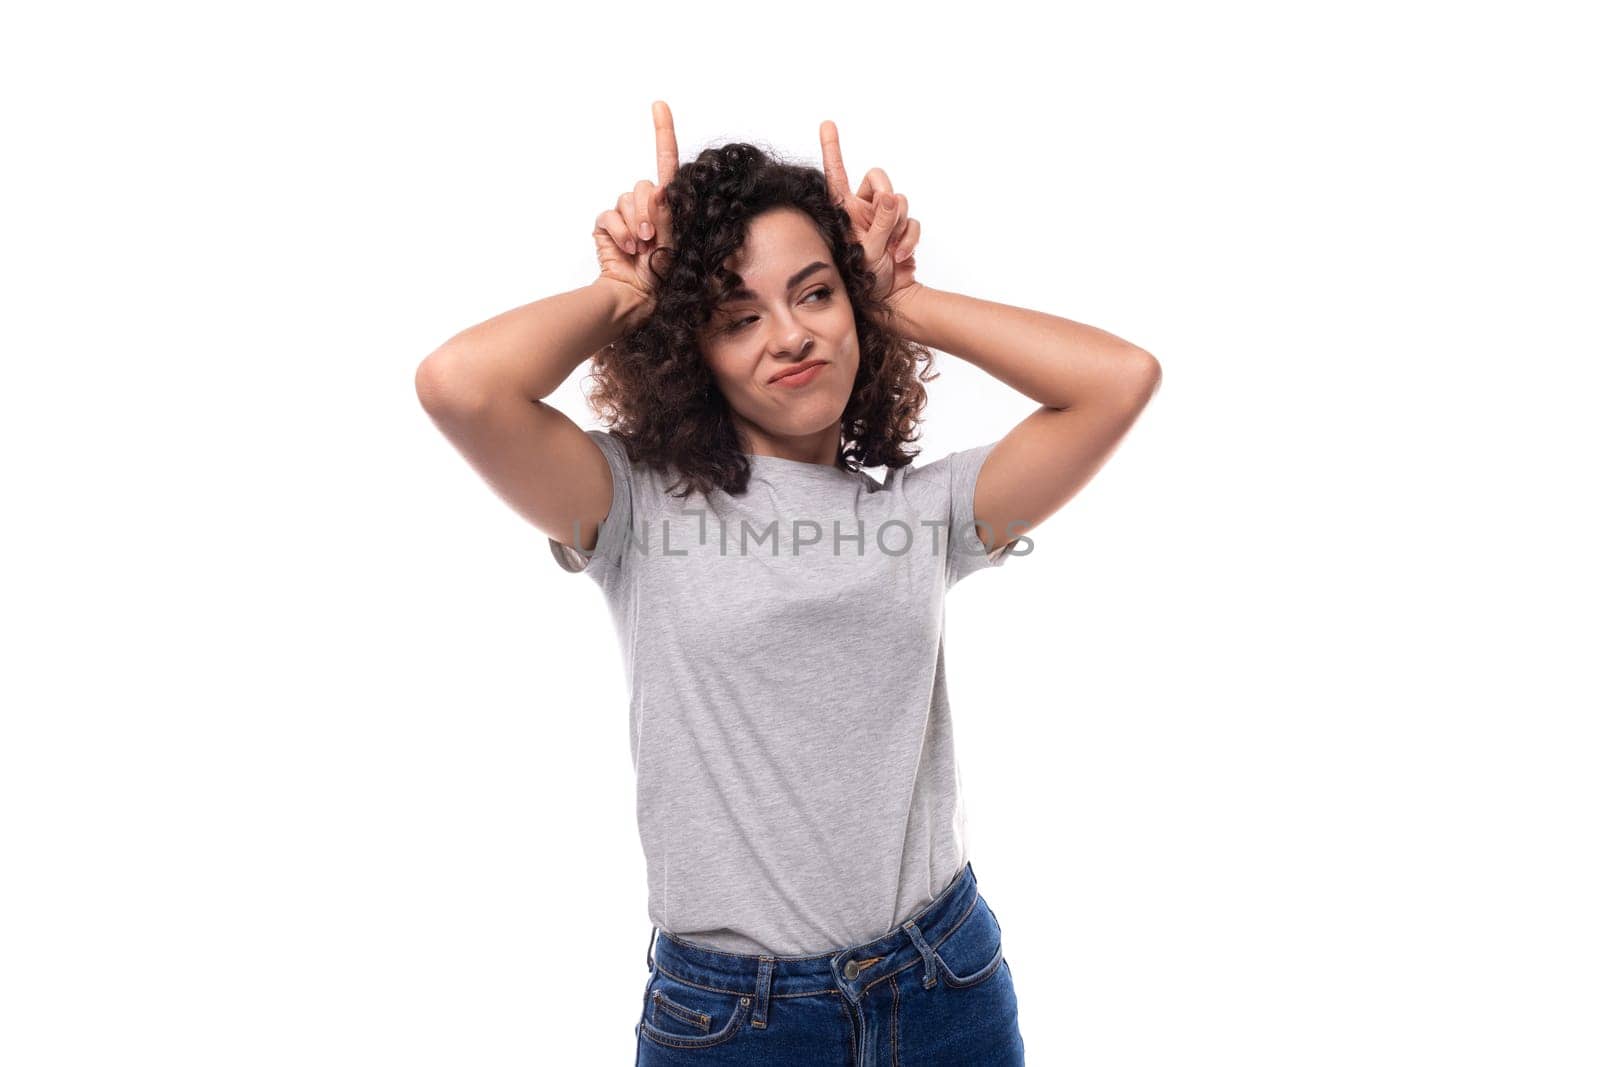 active bright curly woman with black hair dressed in a casual gray t-shirt with an identity print mockup on a white background with copy space.